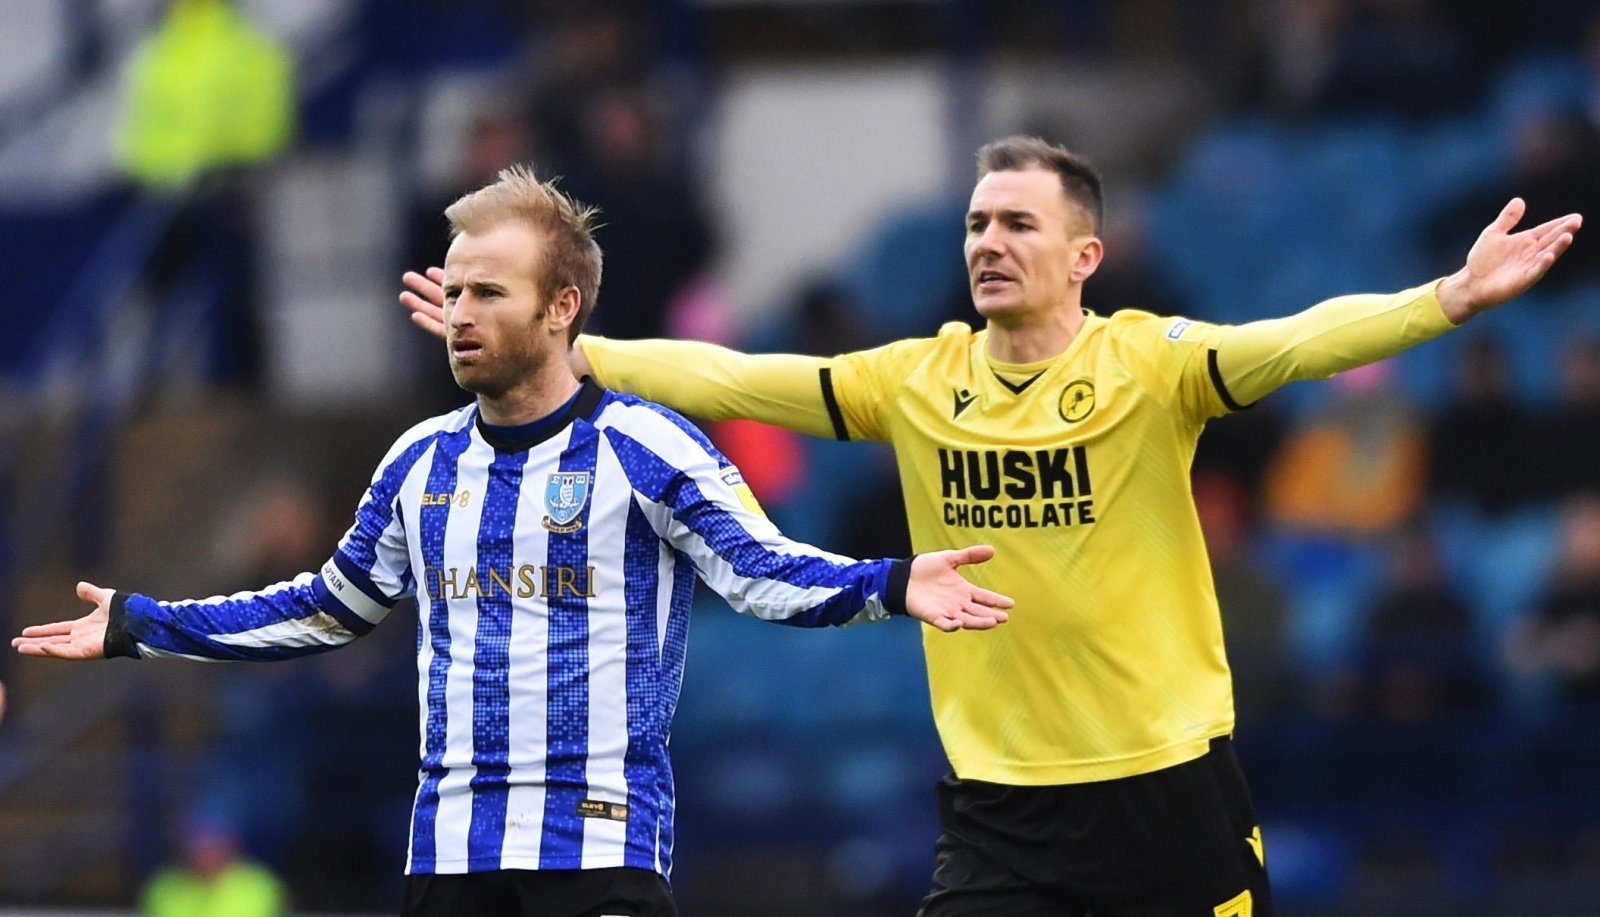 Sheffield Wednesday Transfer Round Up: Derby In For Owls Target, Surprising Bannan Development & No Move For 22 Year Old. Football League World